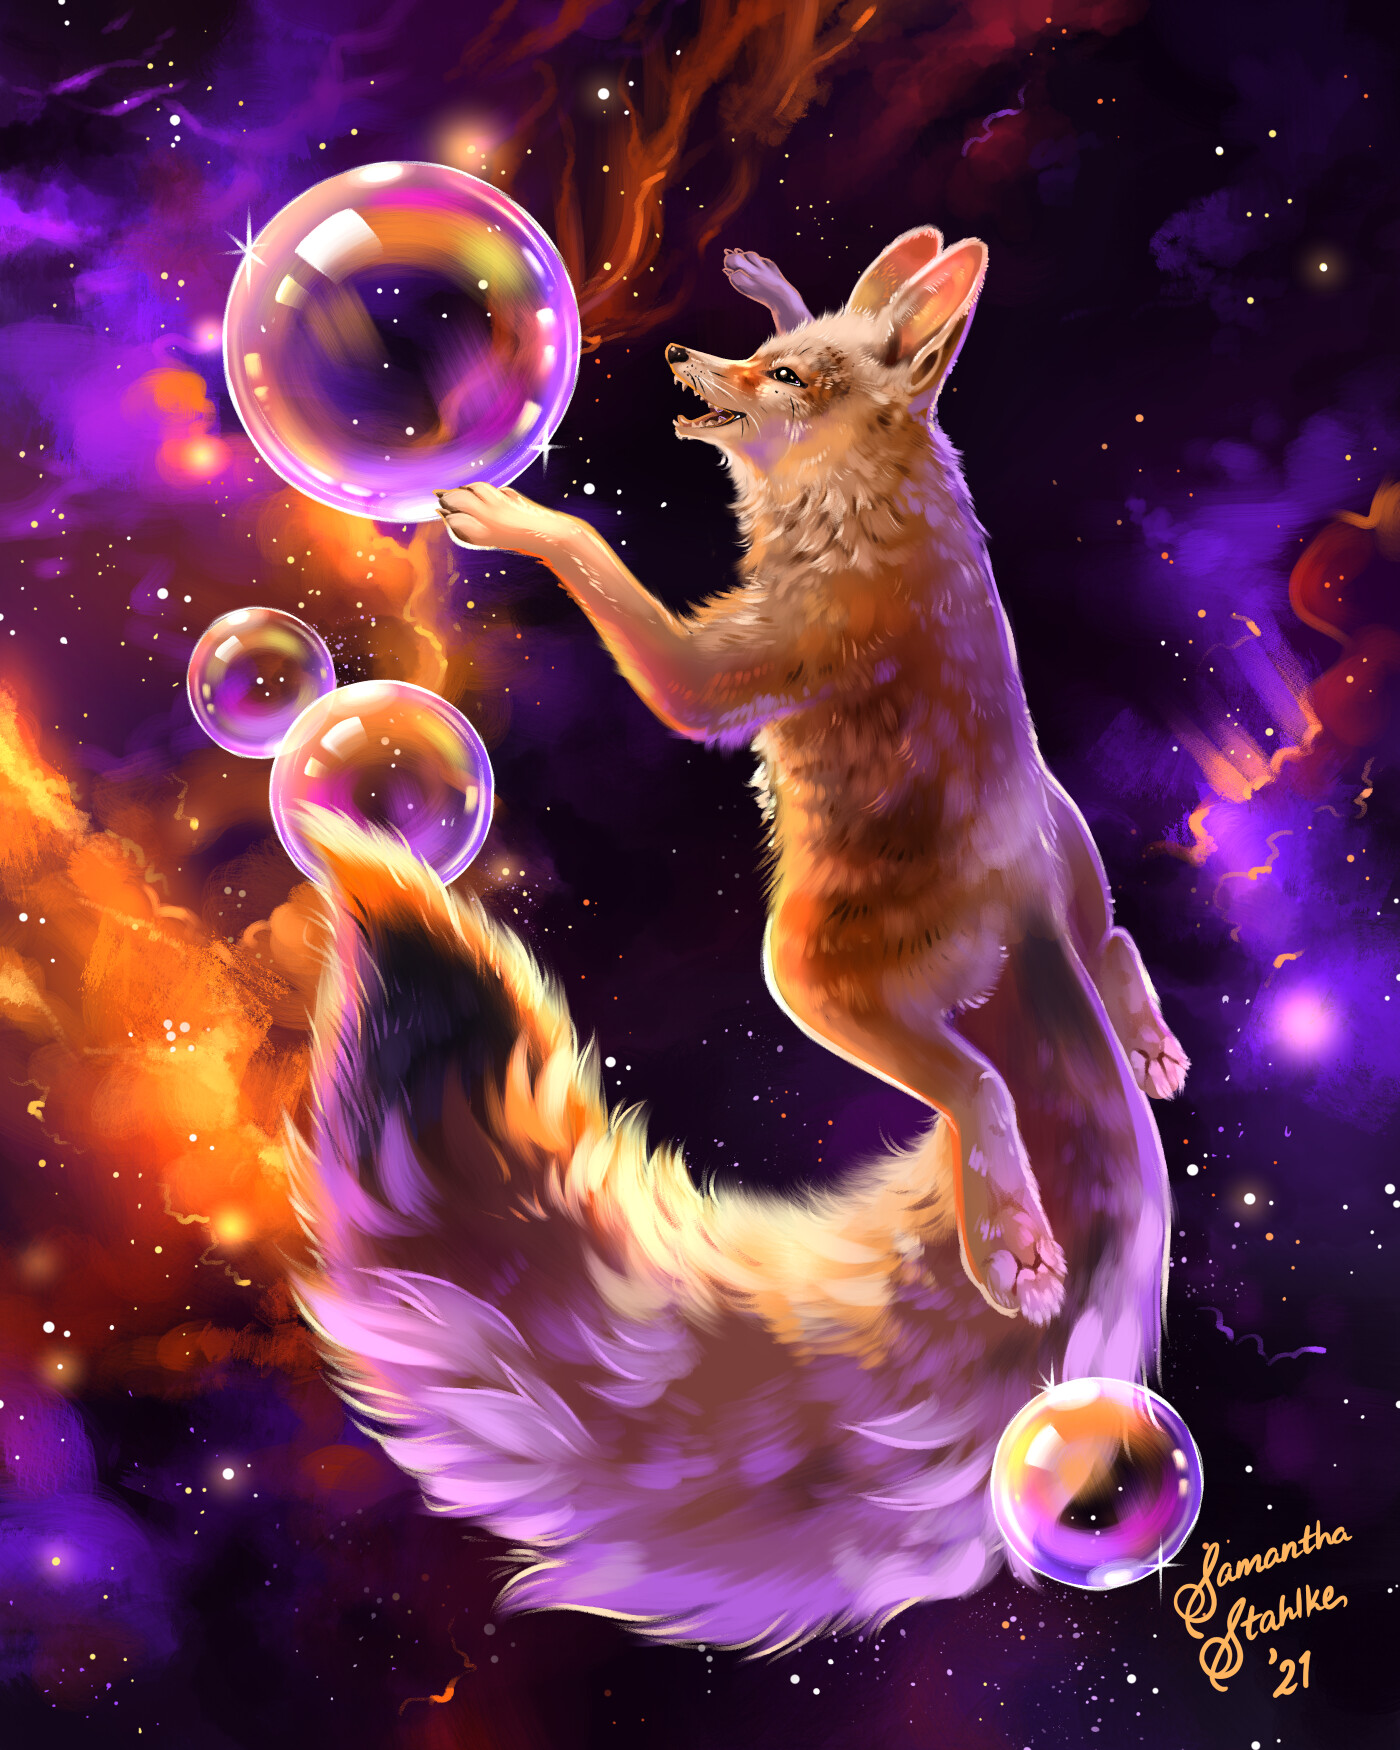 Share more than 51 galaxy fox wallpaper latest - in.cdgdbentre